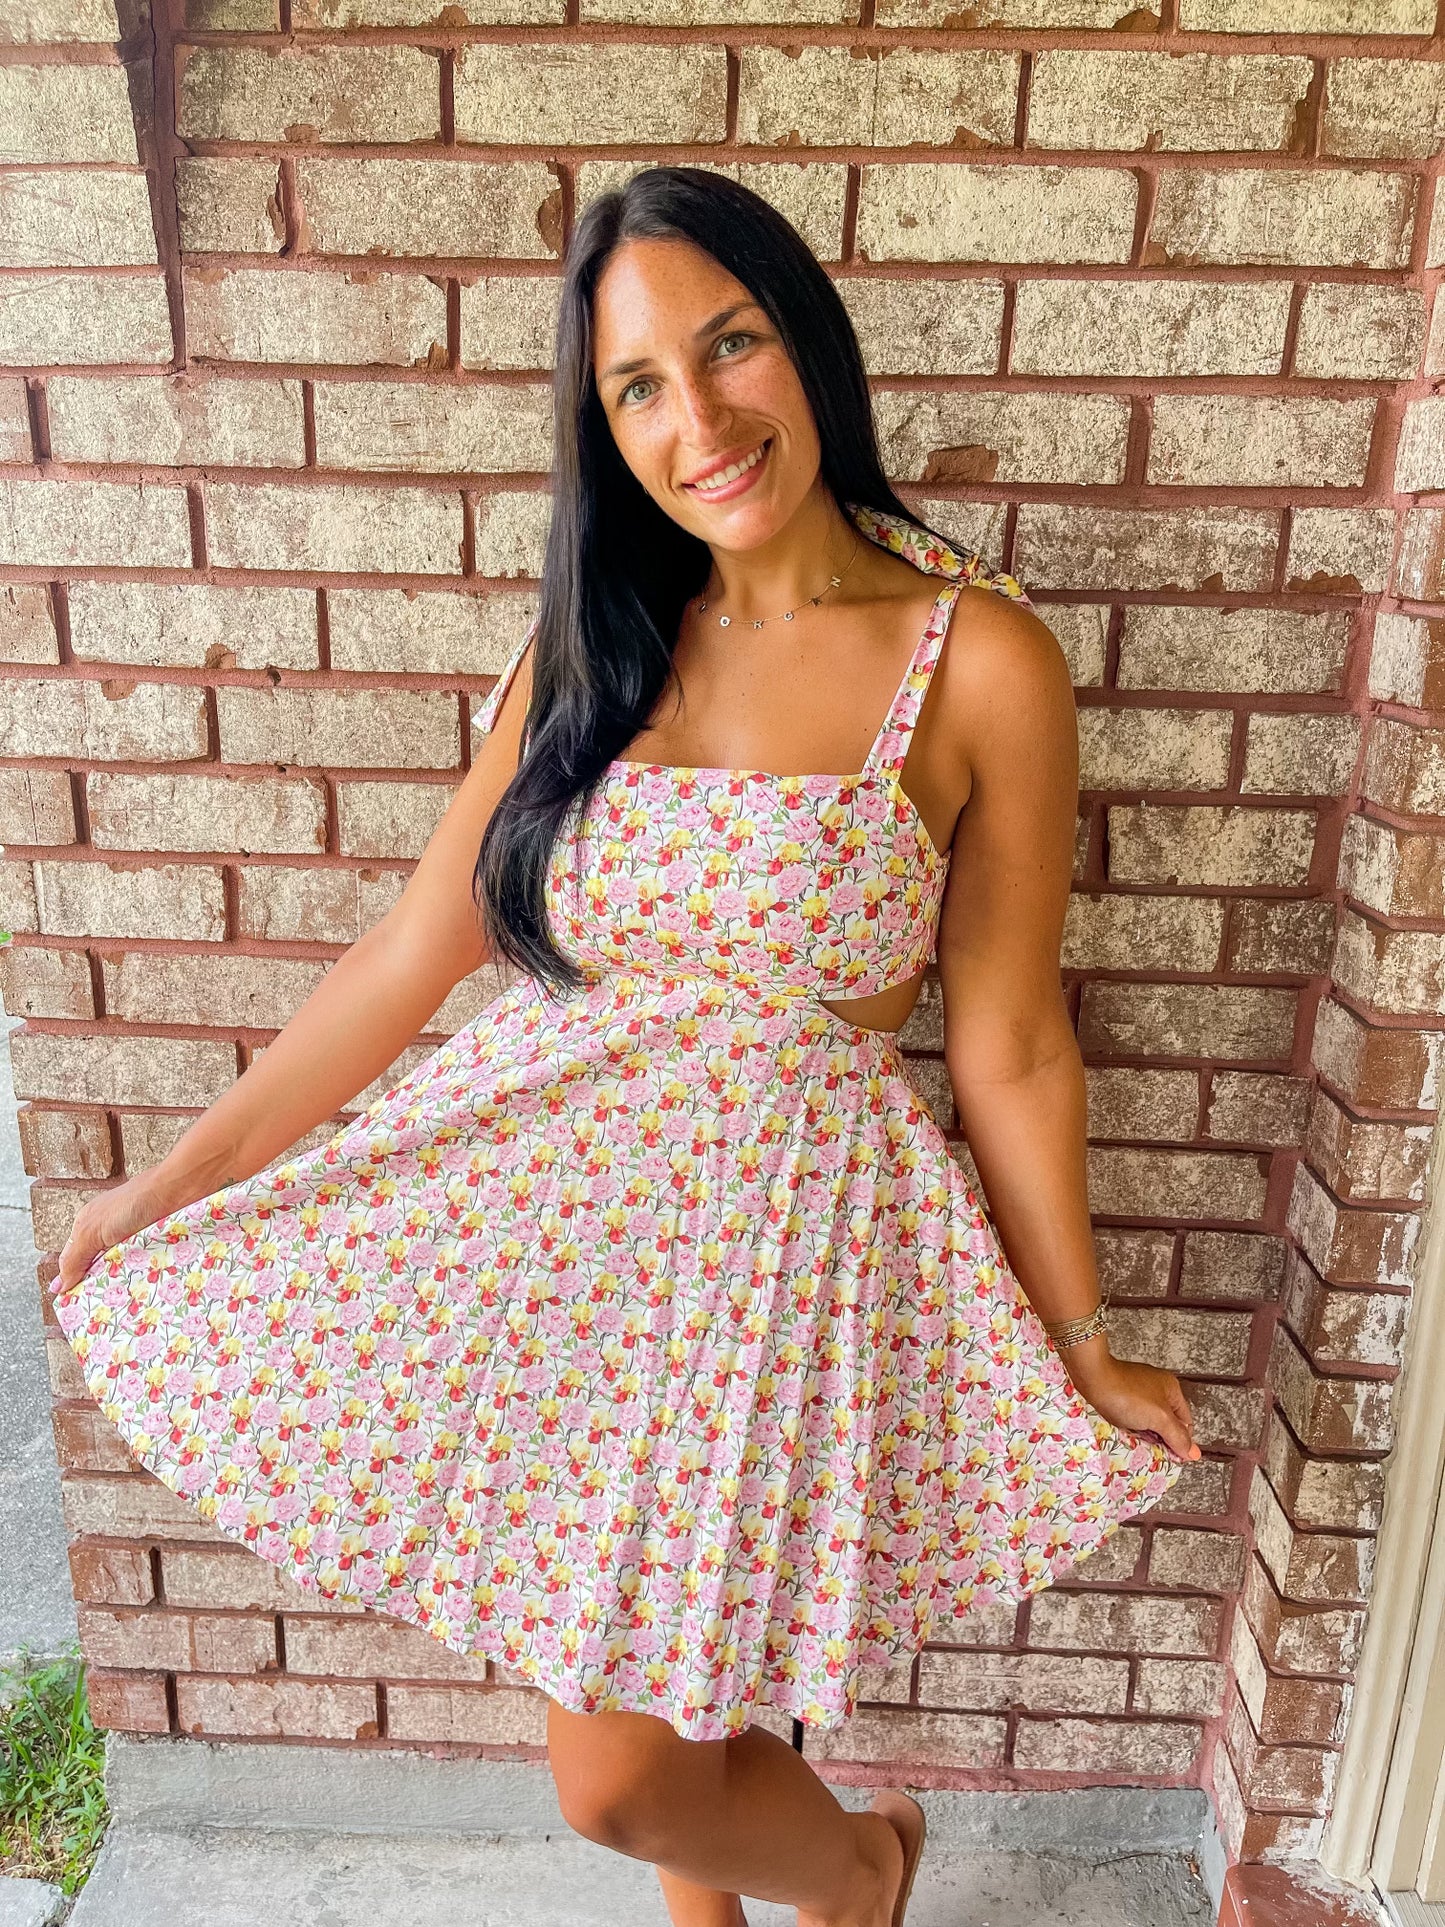 All time floral dress